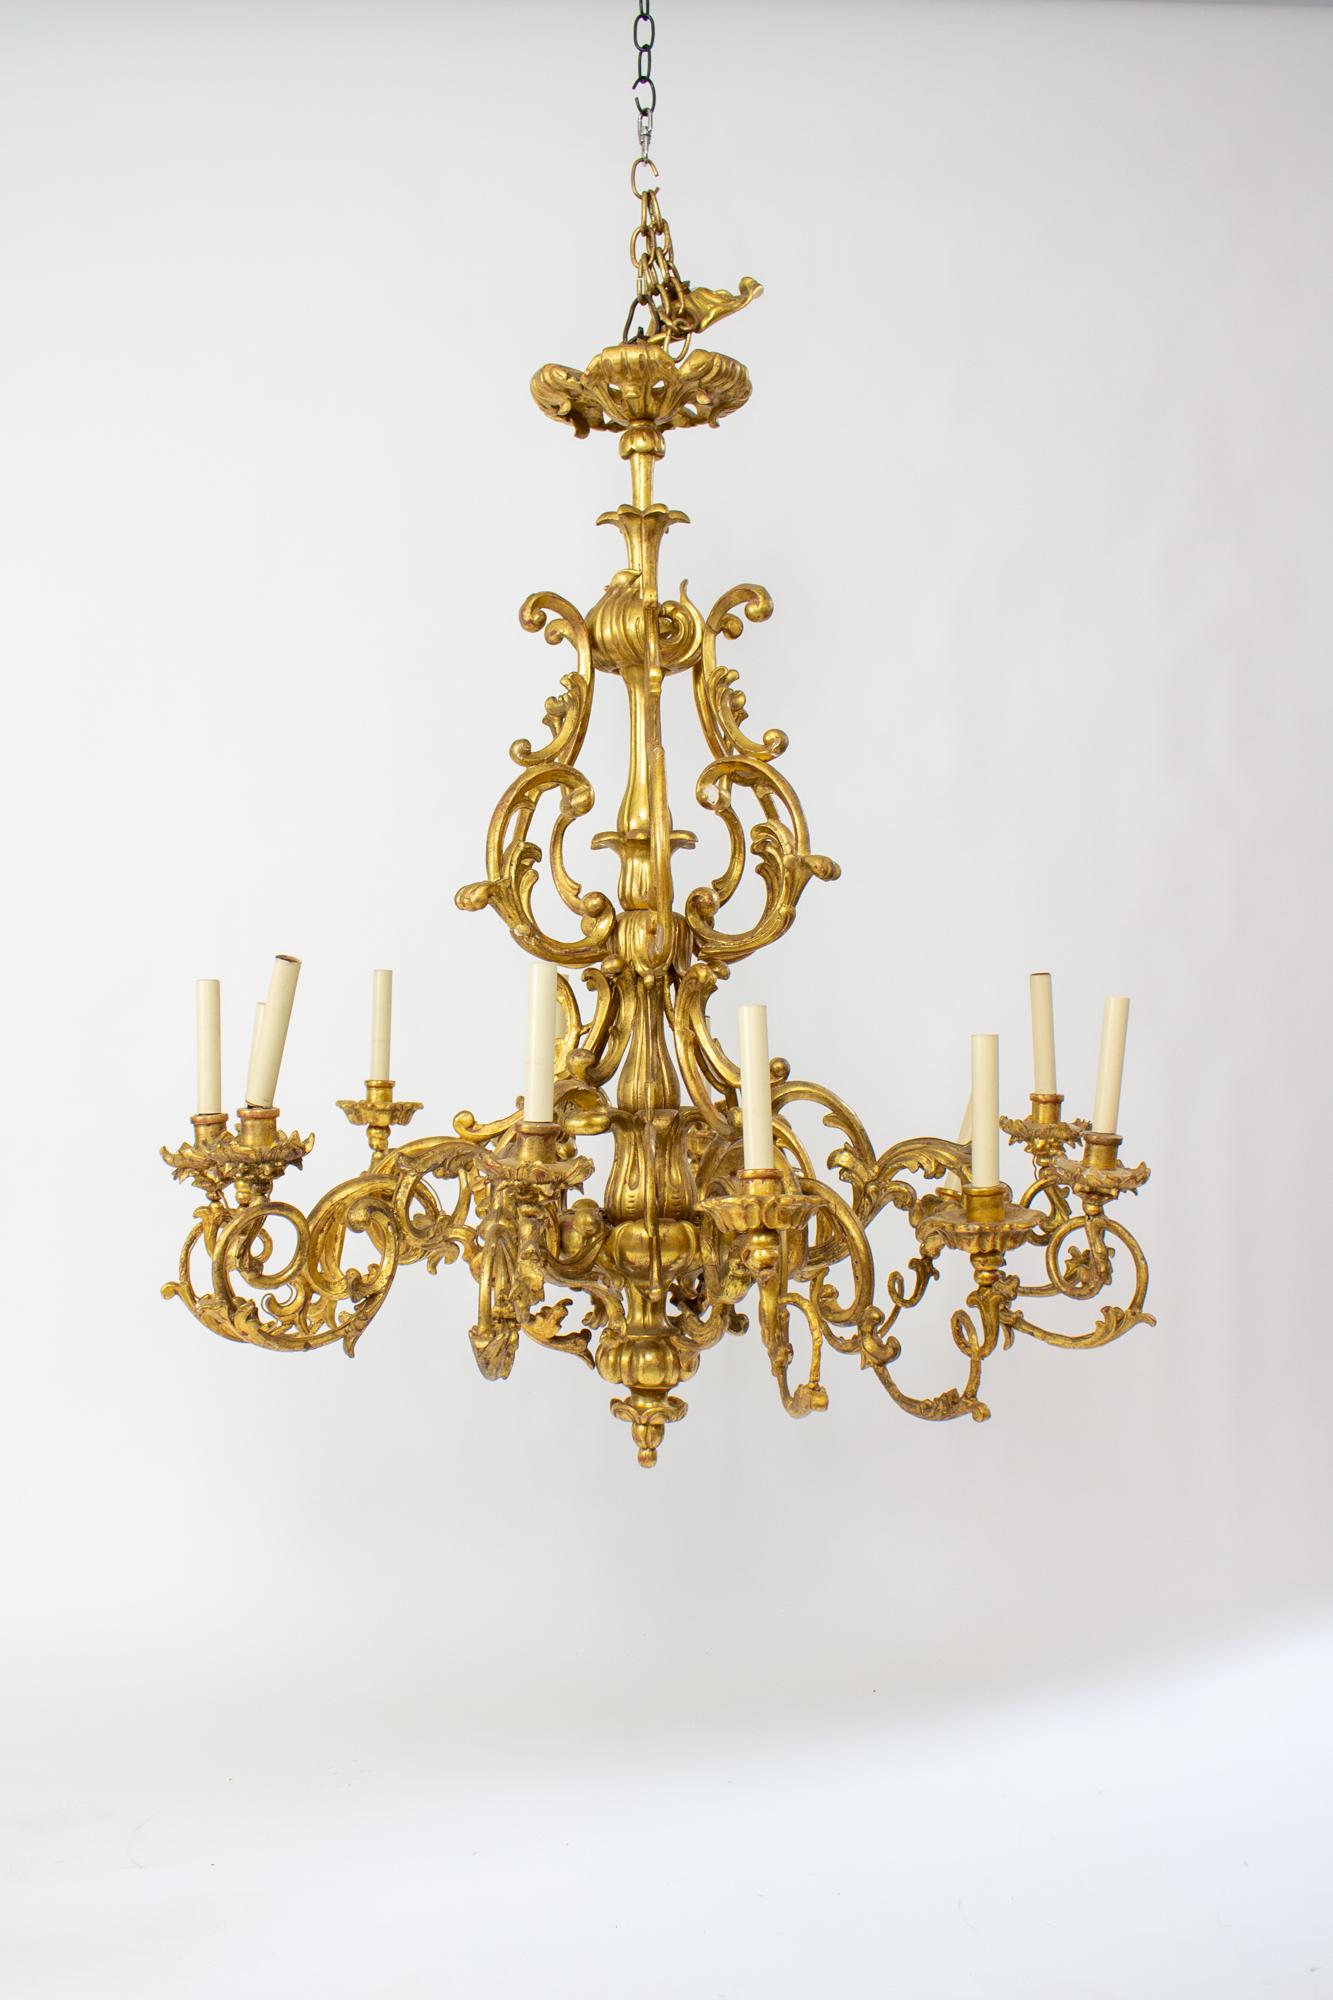 19th century Rococo French giltwood pair of chandeliers. These are large chandeliers, 42” in diameter and 47” in Height, and are suitable for a truly palatial space. Ornate and organic in form, with arms swooping in a twisting fashion around the